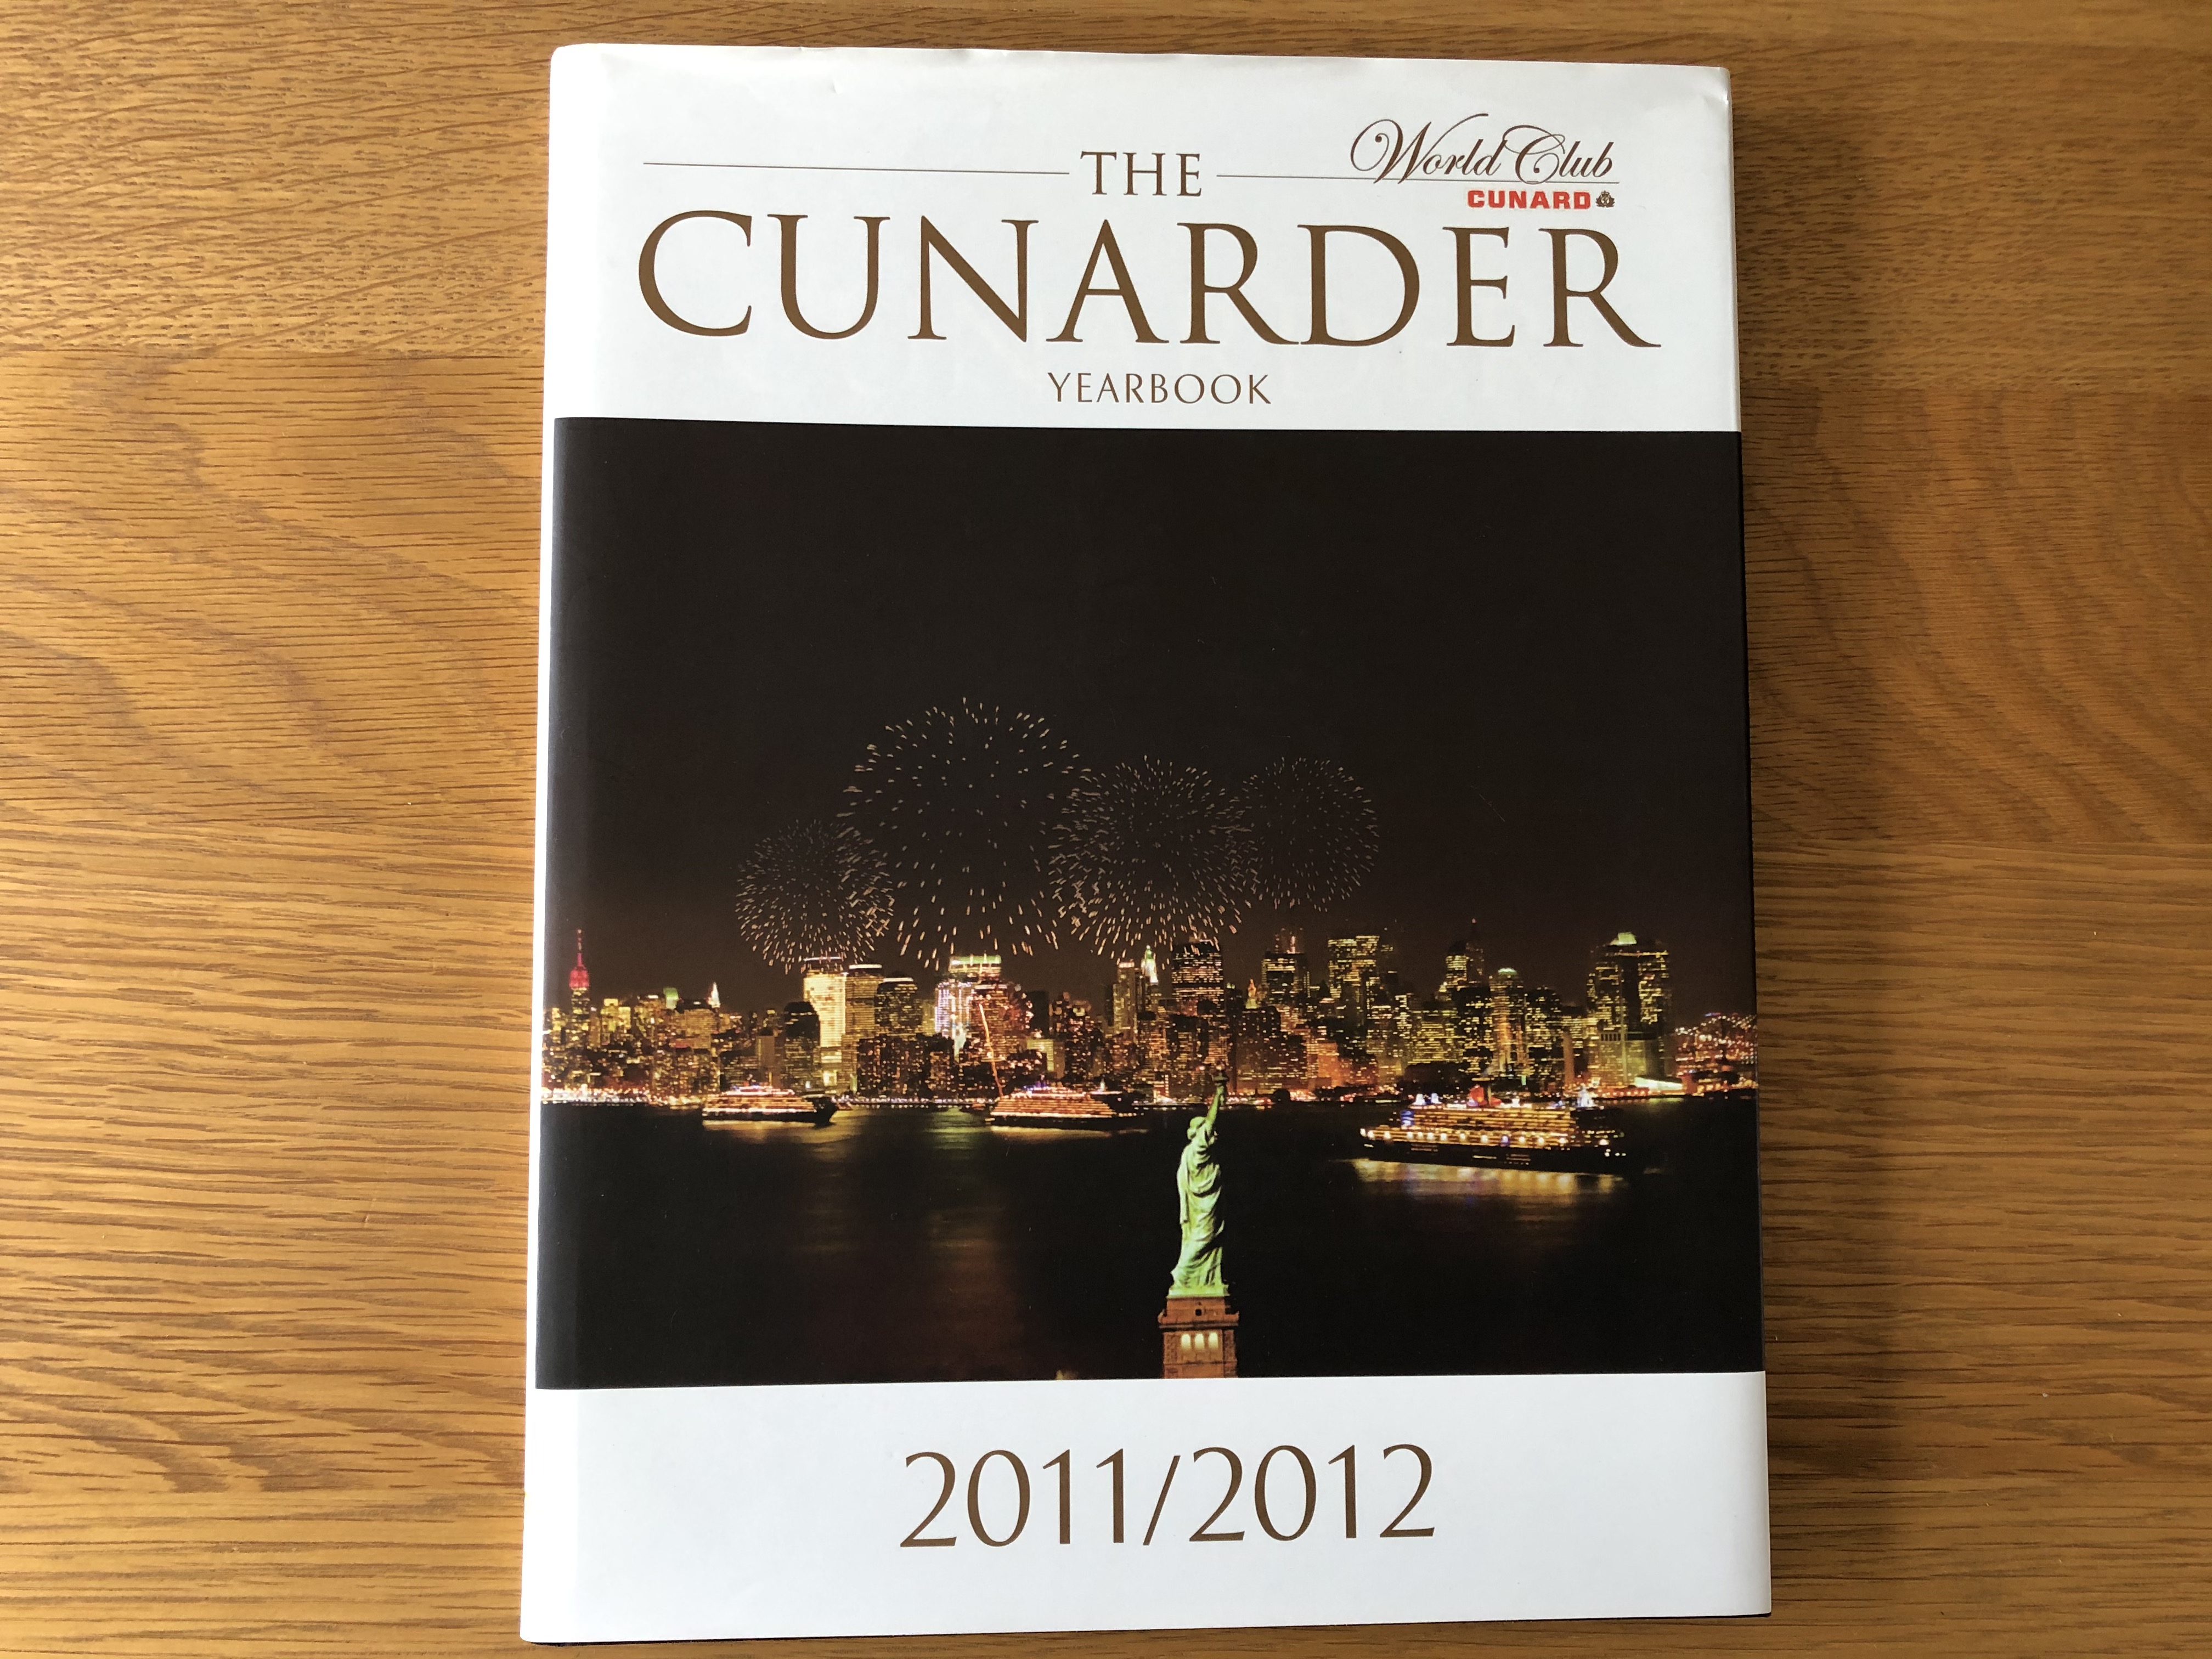 EDITION OF THE CUNARDER YEARBOOK FROM 2011 ​​​​​​​